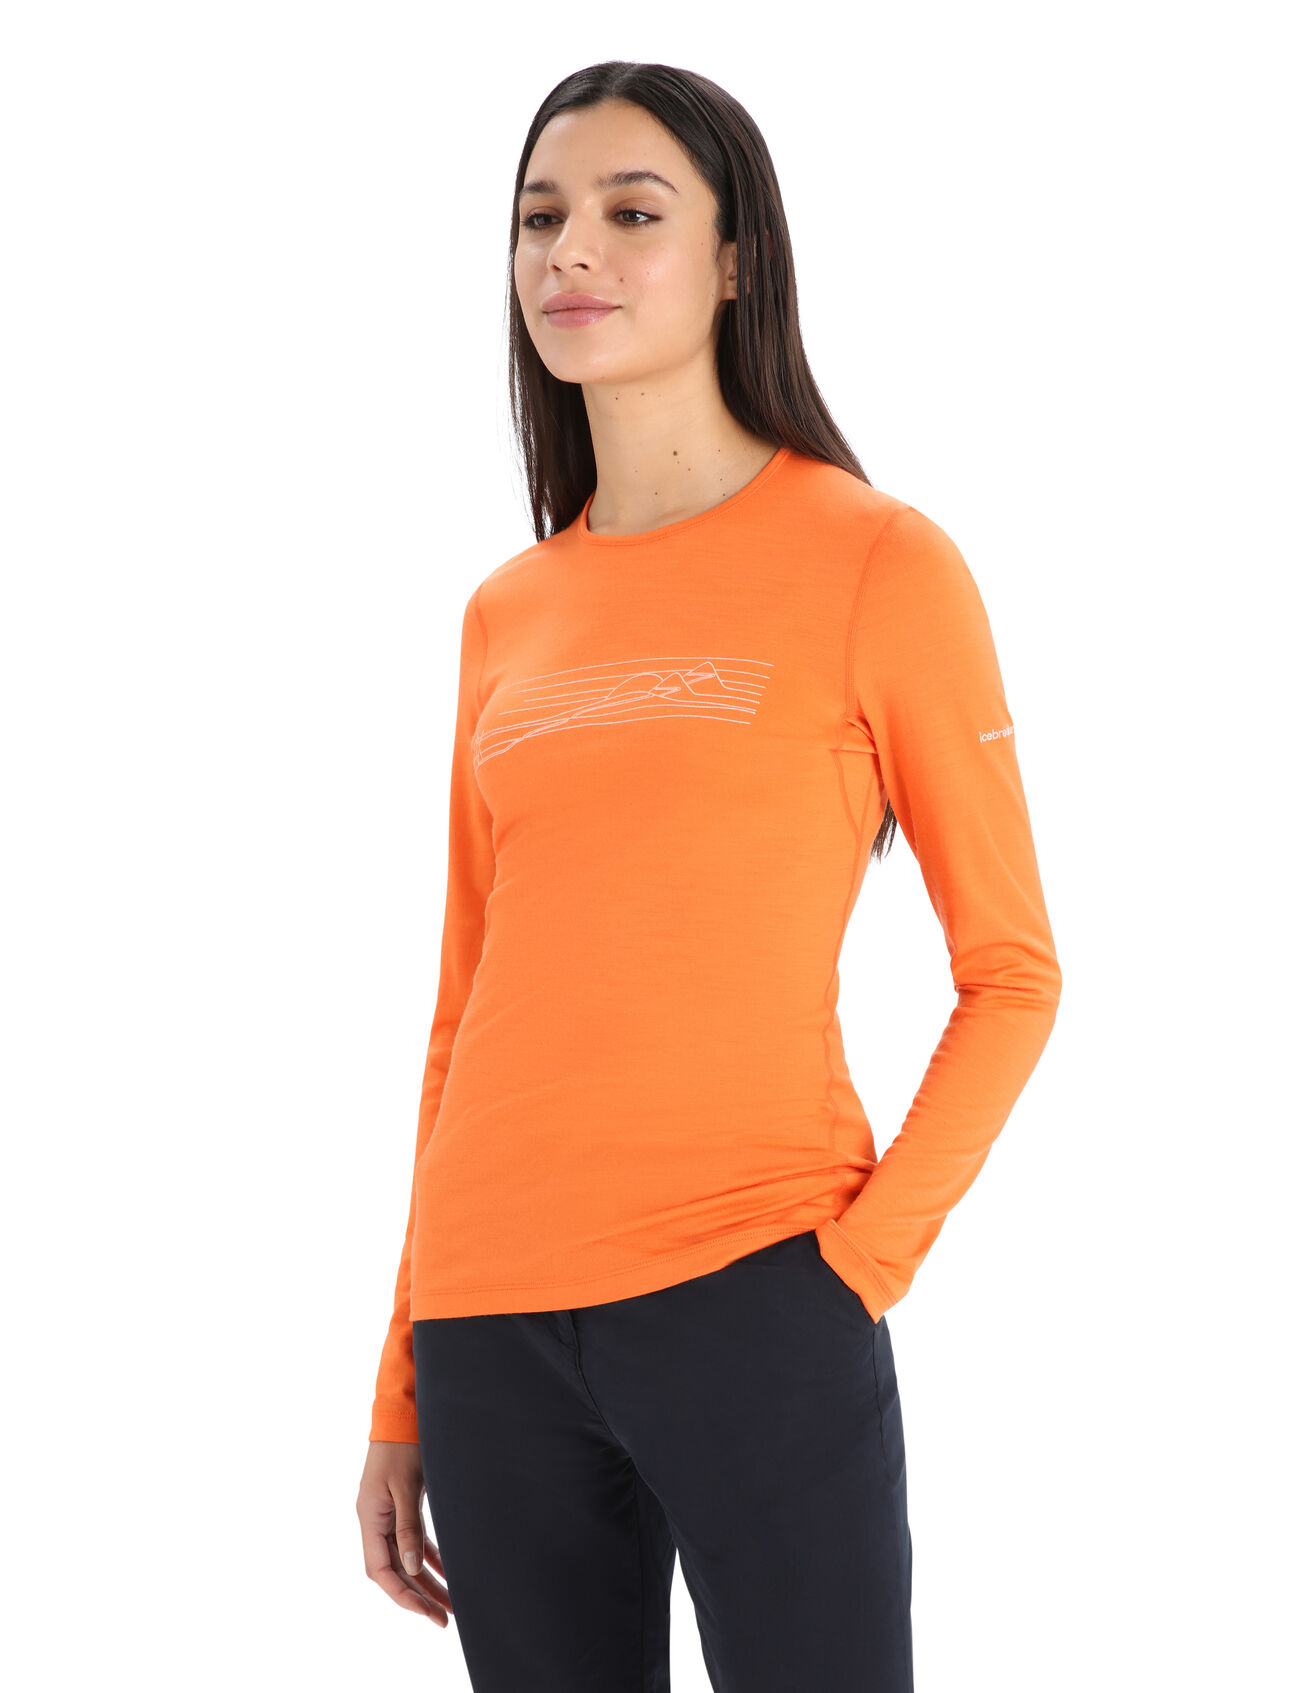 Womens Merino 200 Oasis Long Sleeve Crewe Ski Stripes The benchmark against which all others are judged, the 200 Oasis Long Sleeve Crewe Ski Stripes features our most versatile merino jersey fabric for year-round layering performance across any activity. The original graphic artwork by Damon Watters features a classic alpine powder run.